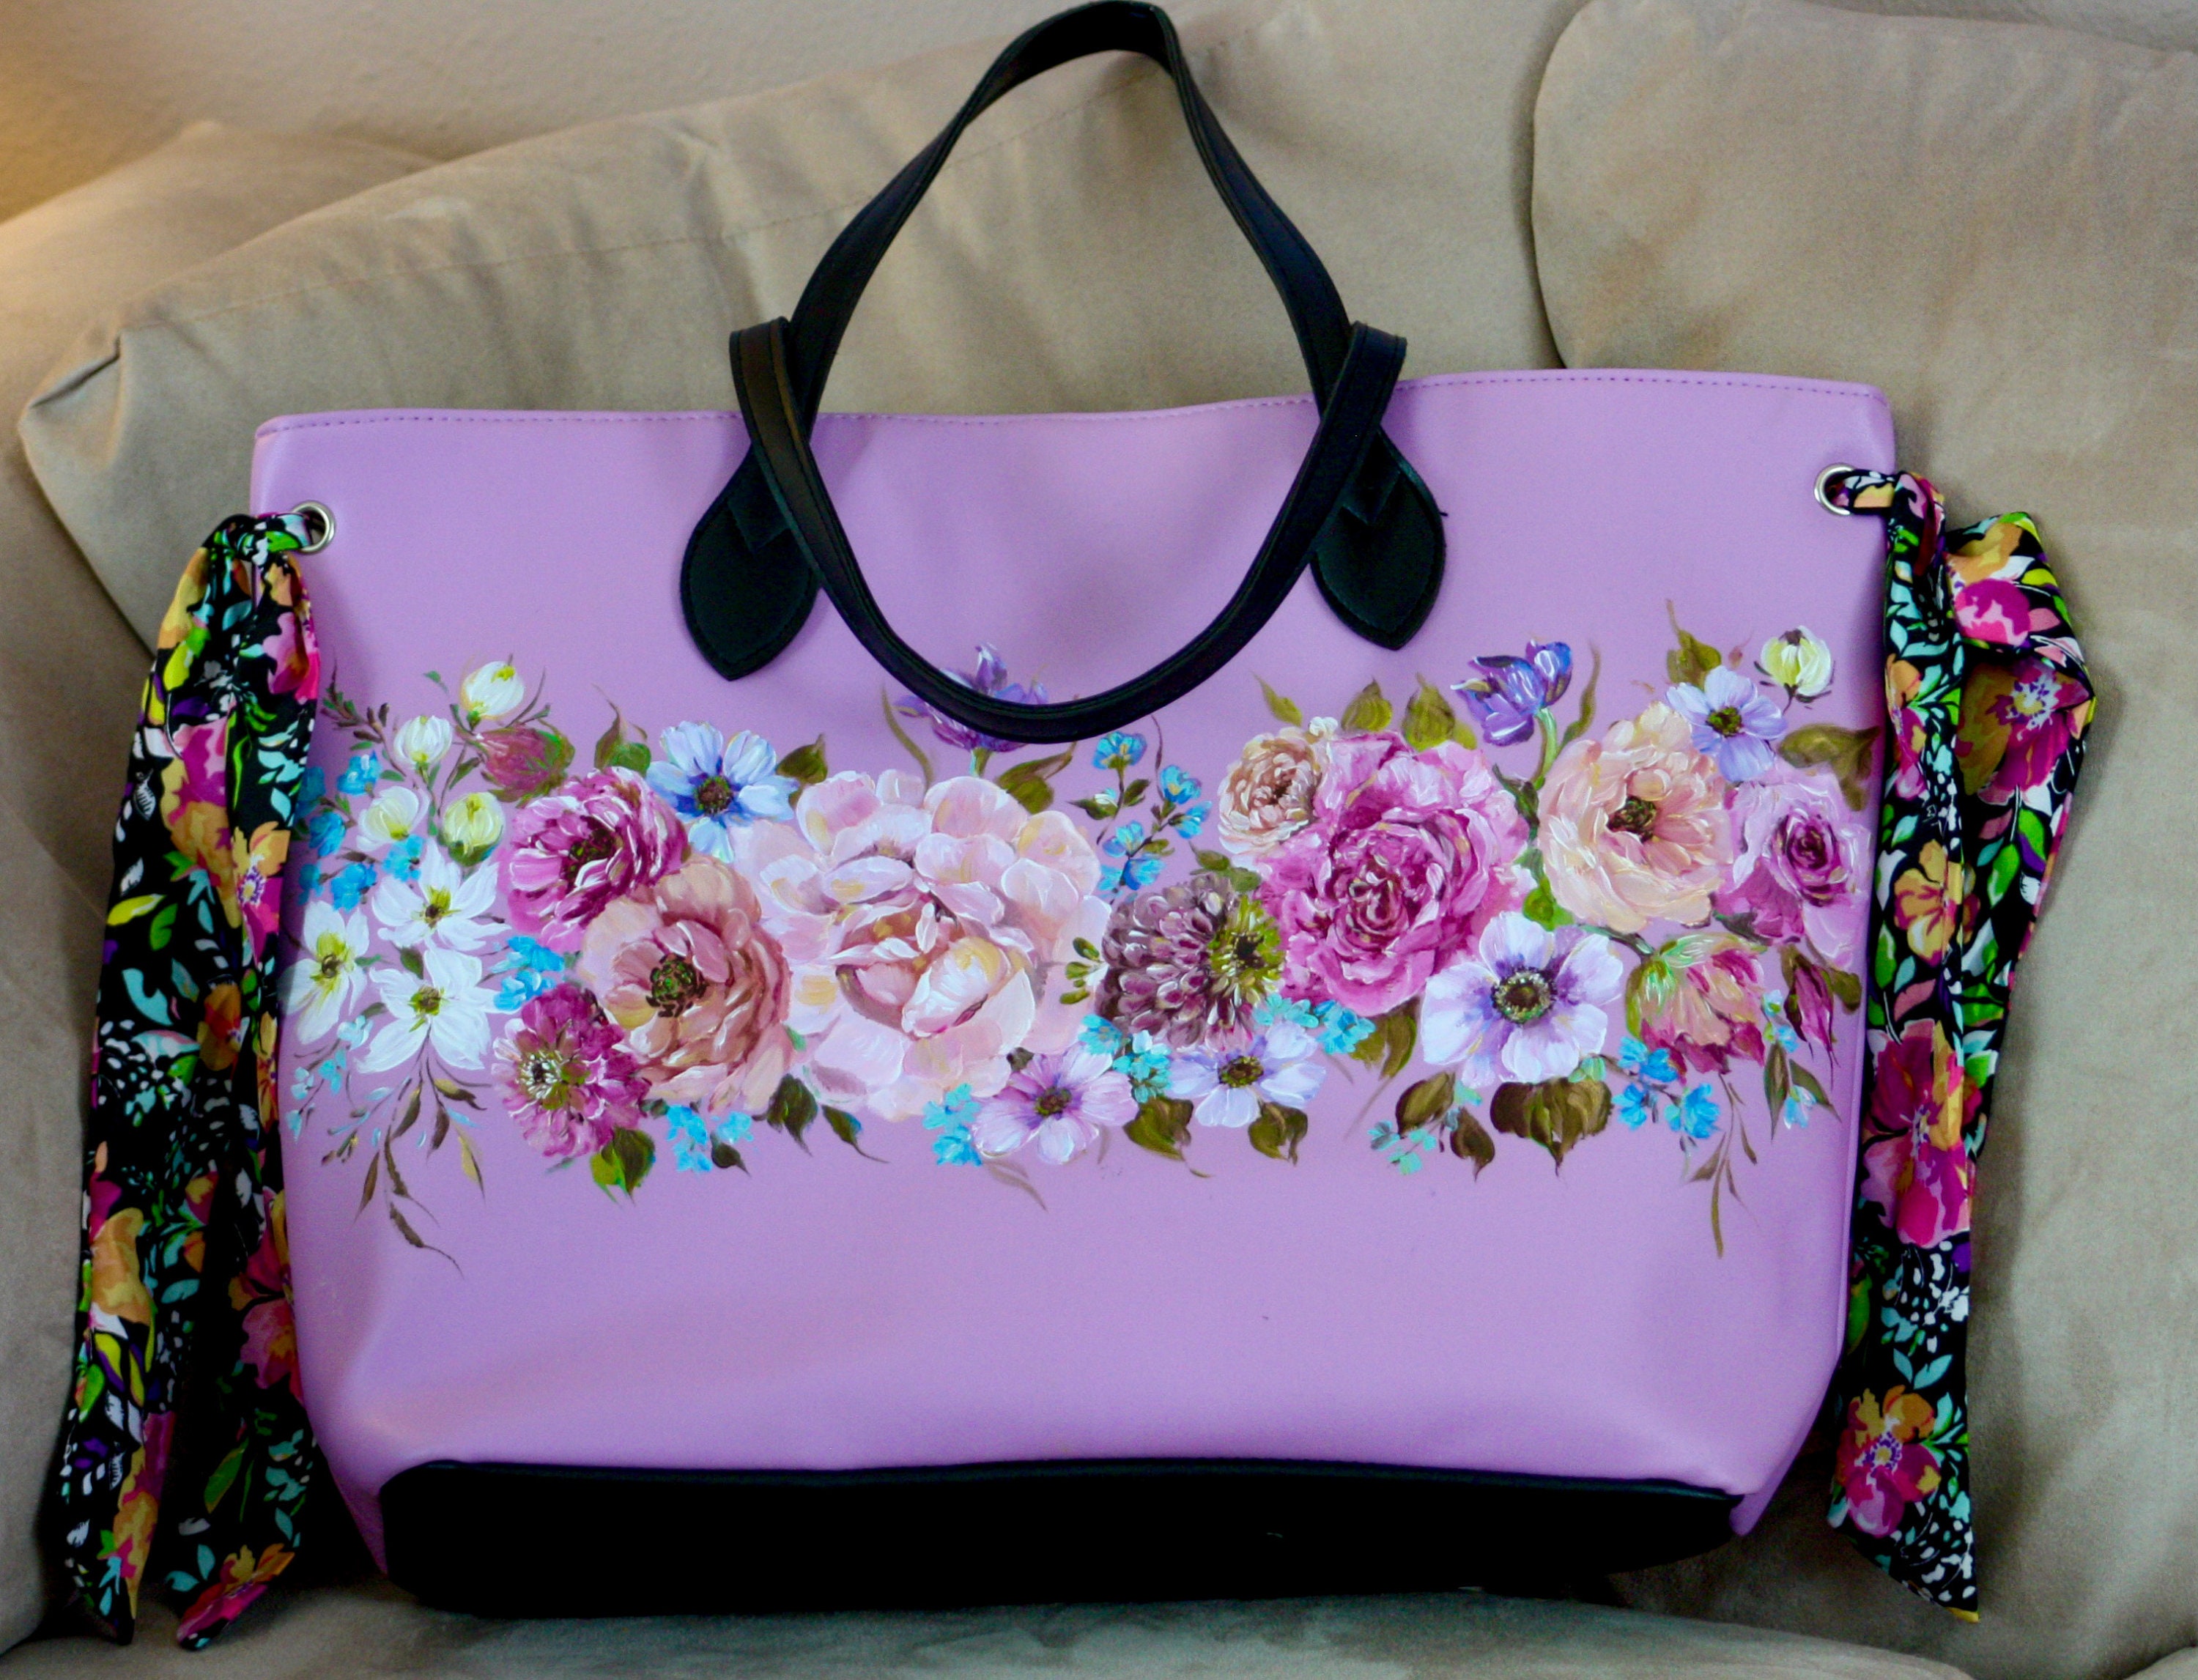 This bag was sent to me for custom painting. Client wants her name